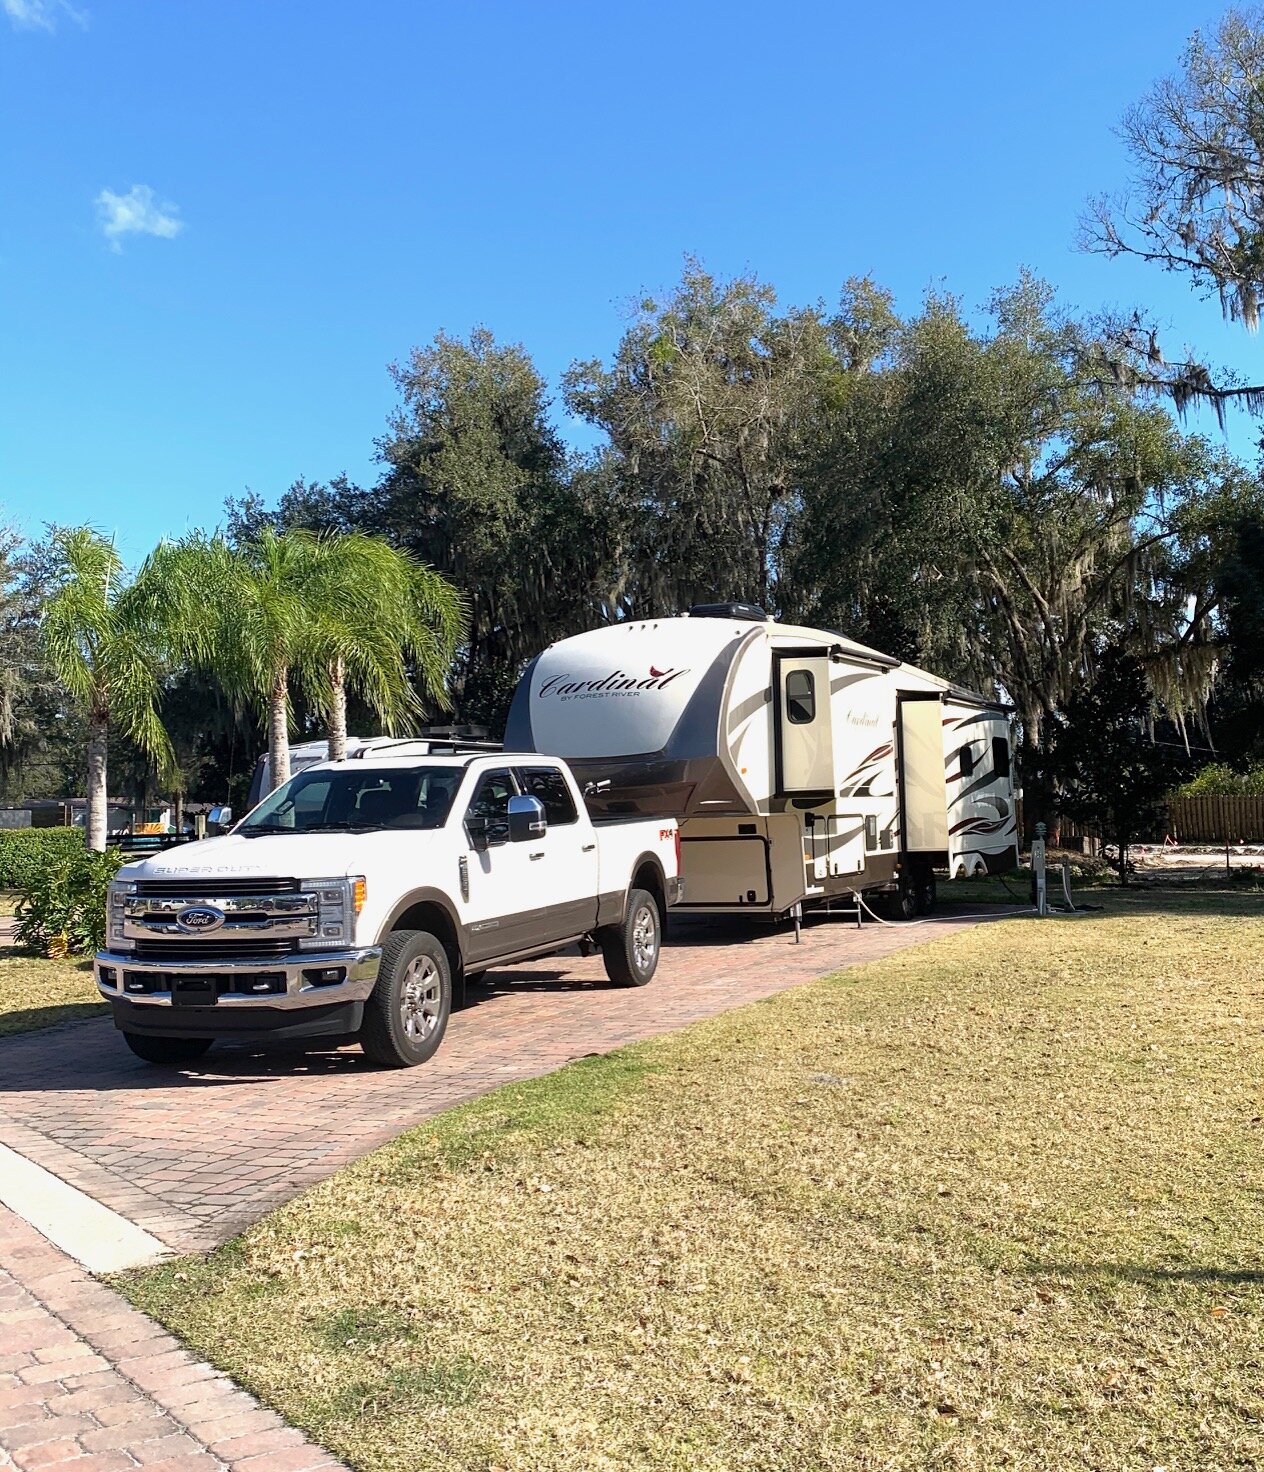  Successfully backed into our RV site at Renegades on the River in Crescent City, Florida.  